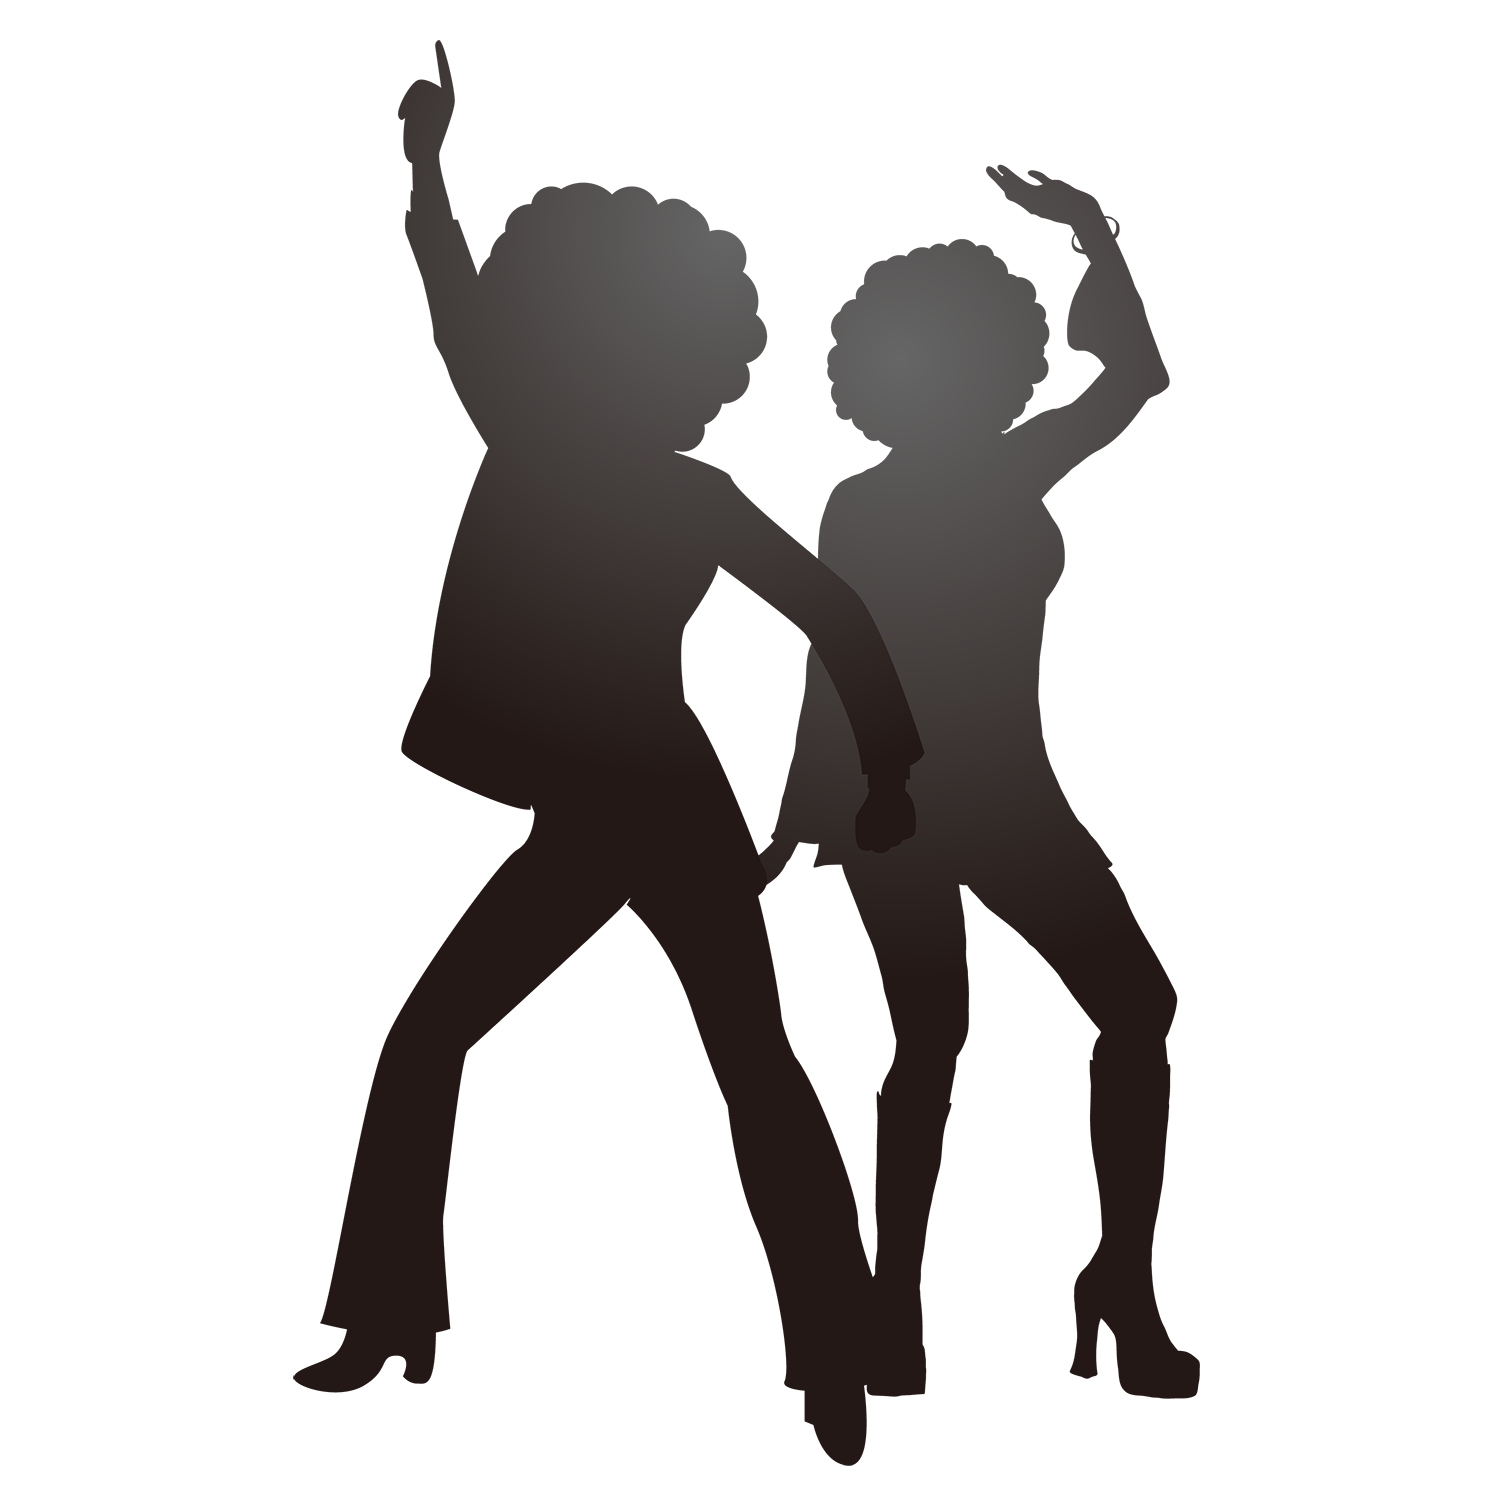 Dance Disco Music Silhouette Vector graphics - bailarin vector png ...